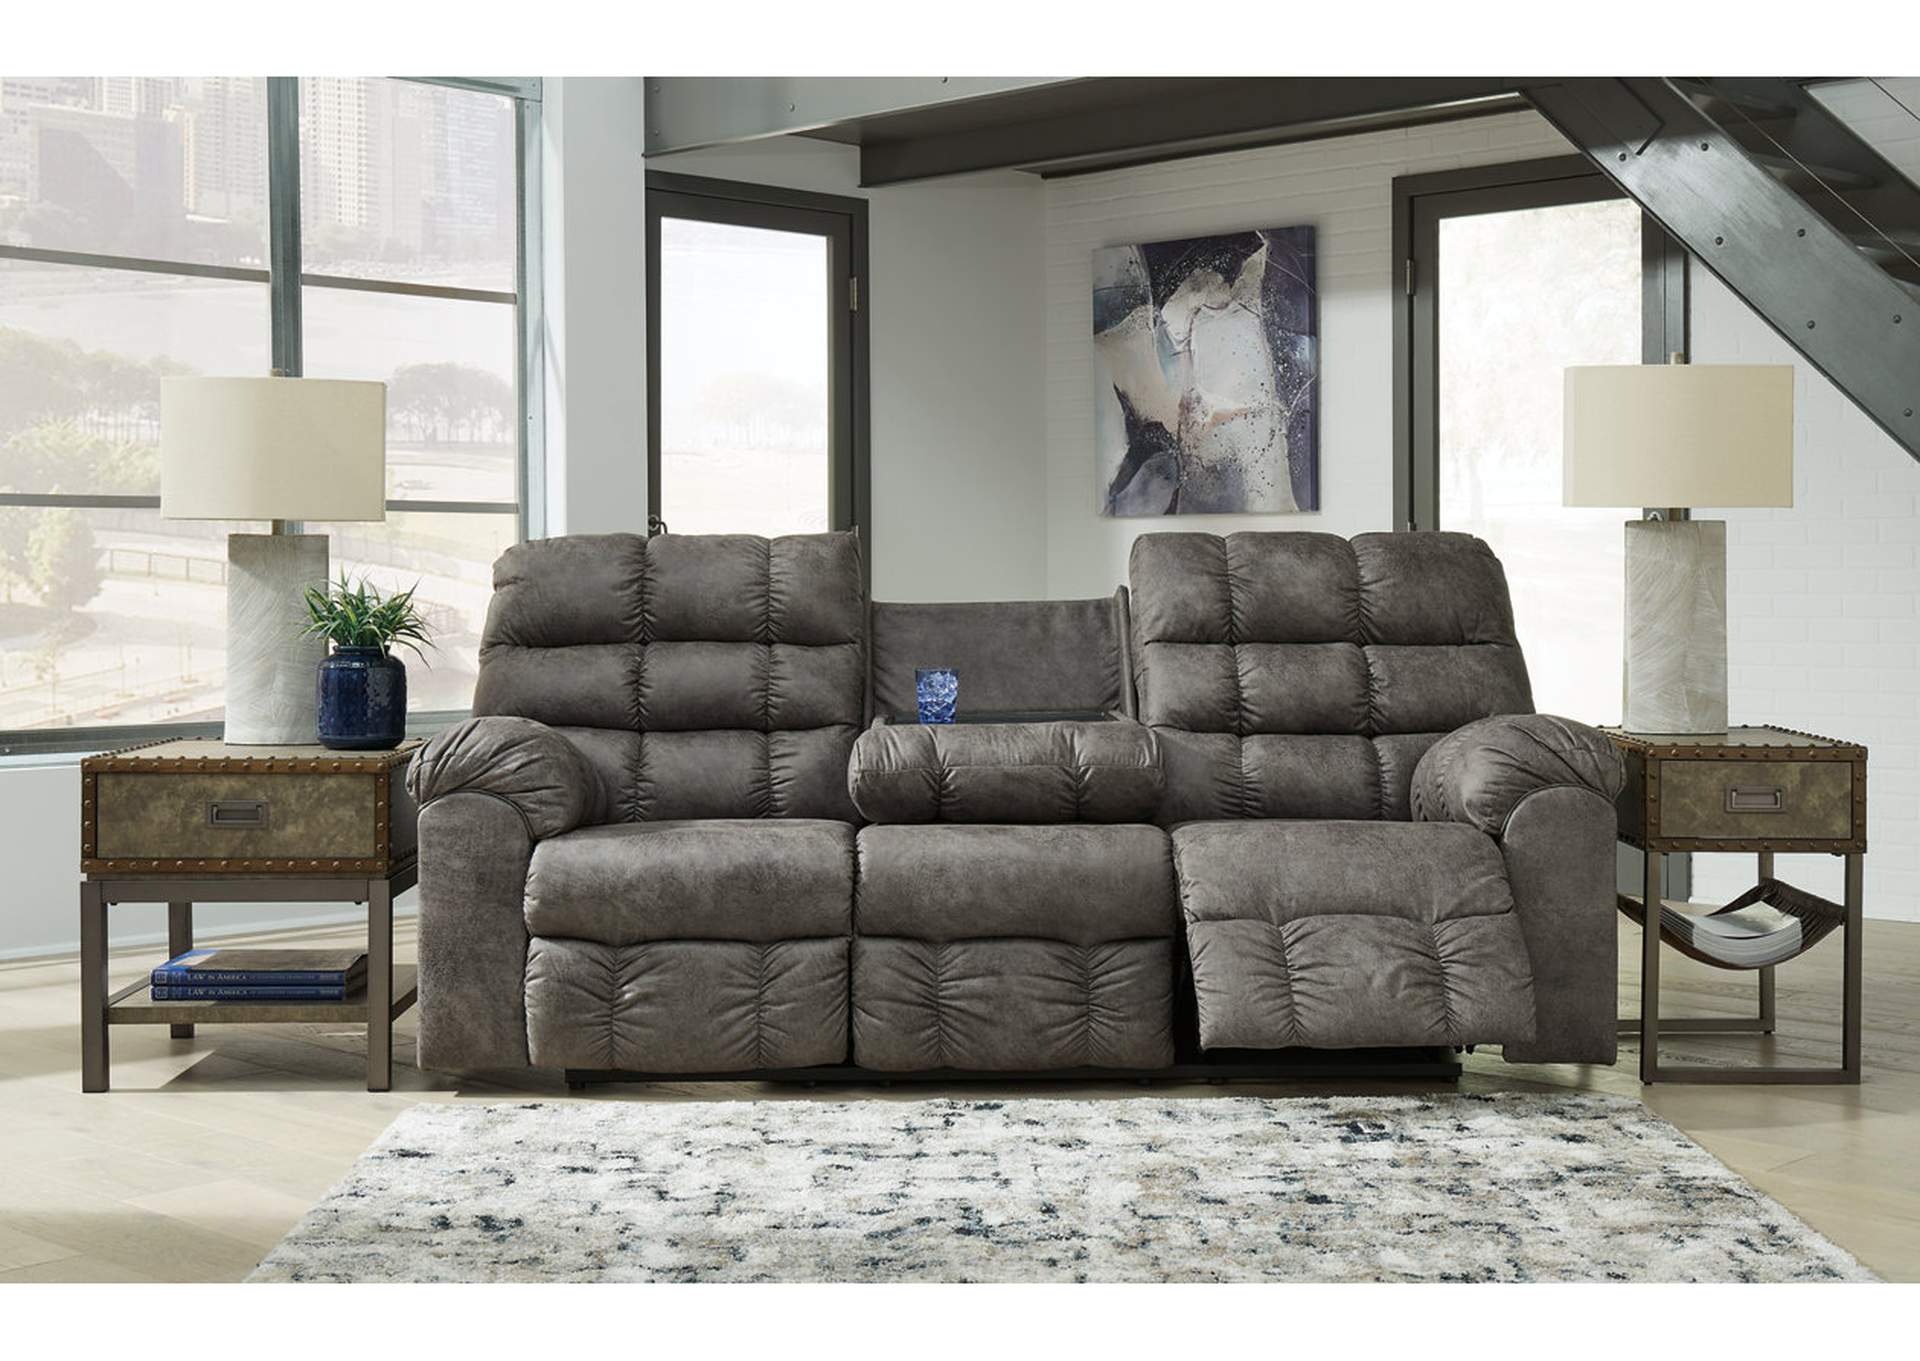 Derwin Reclining Sofa with Drop Down Table,Signature Design By Ashley